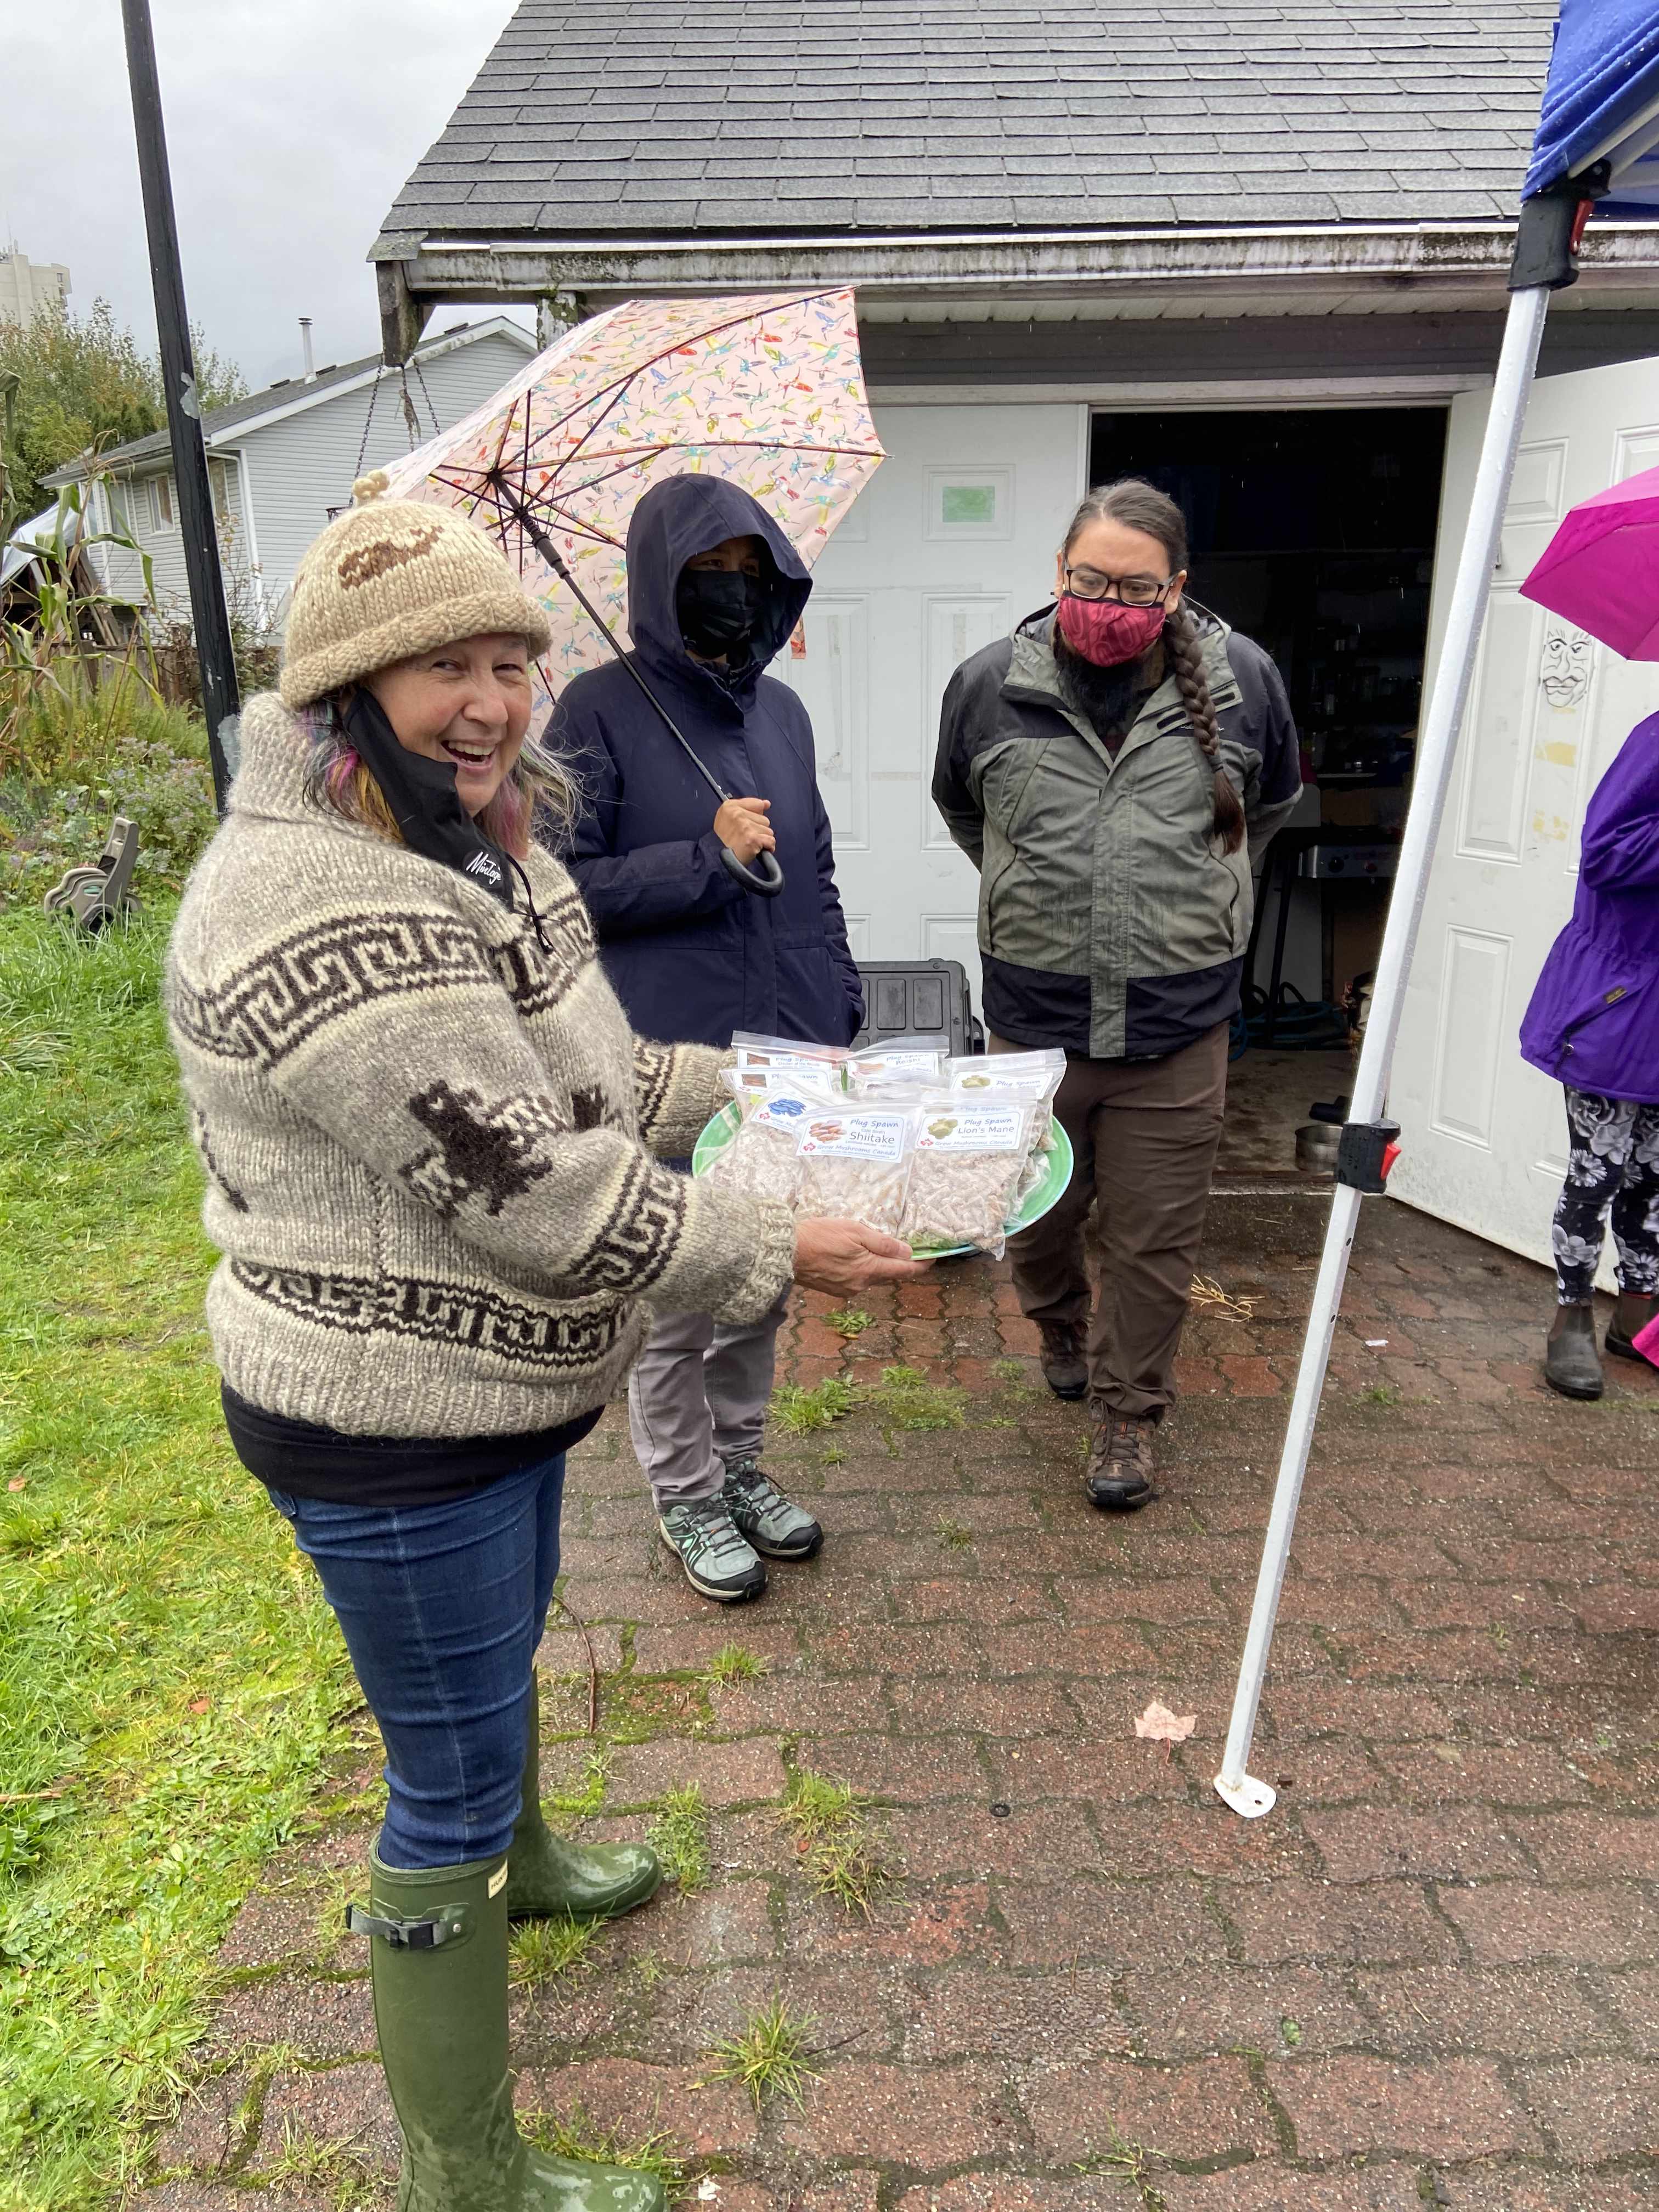 three figures standing in the rain, cease wyss in a cowichan sweater and rubber boots in the foreground holding a tray of mushroom growing kits with a big smile on her face. everyone is standing outside on a brick path in a garden